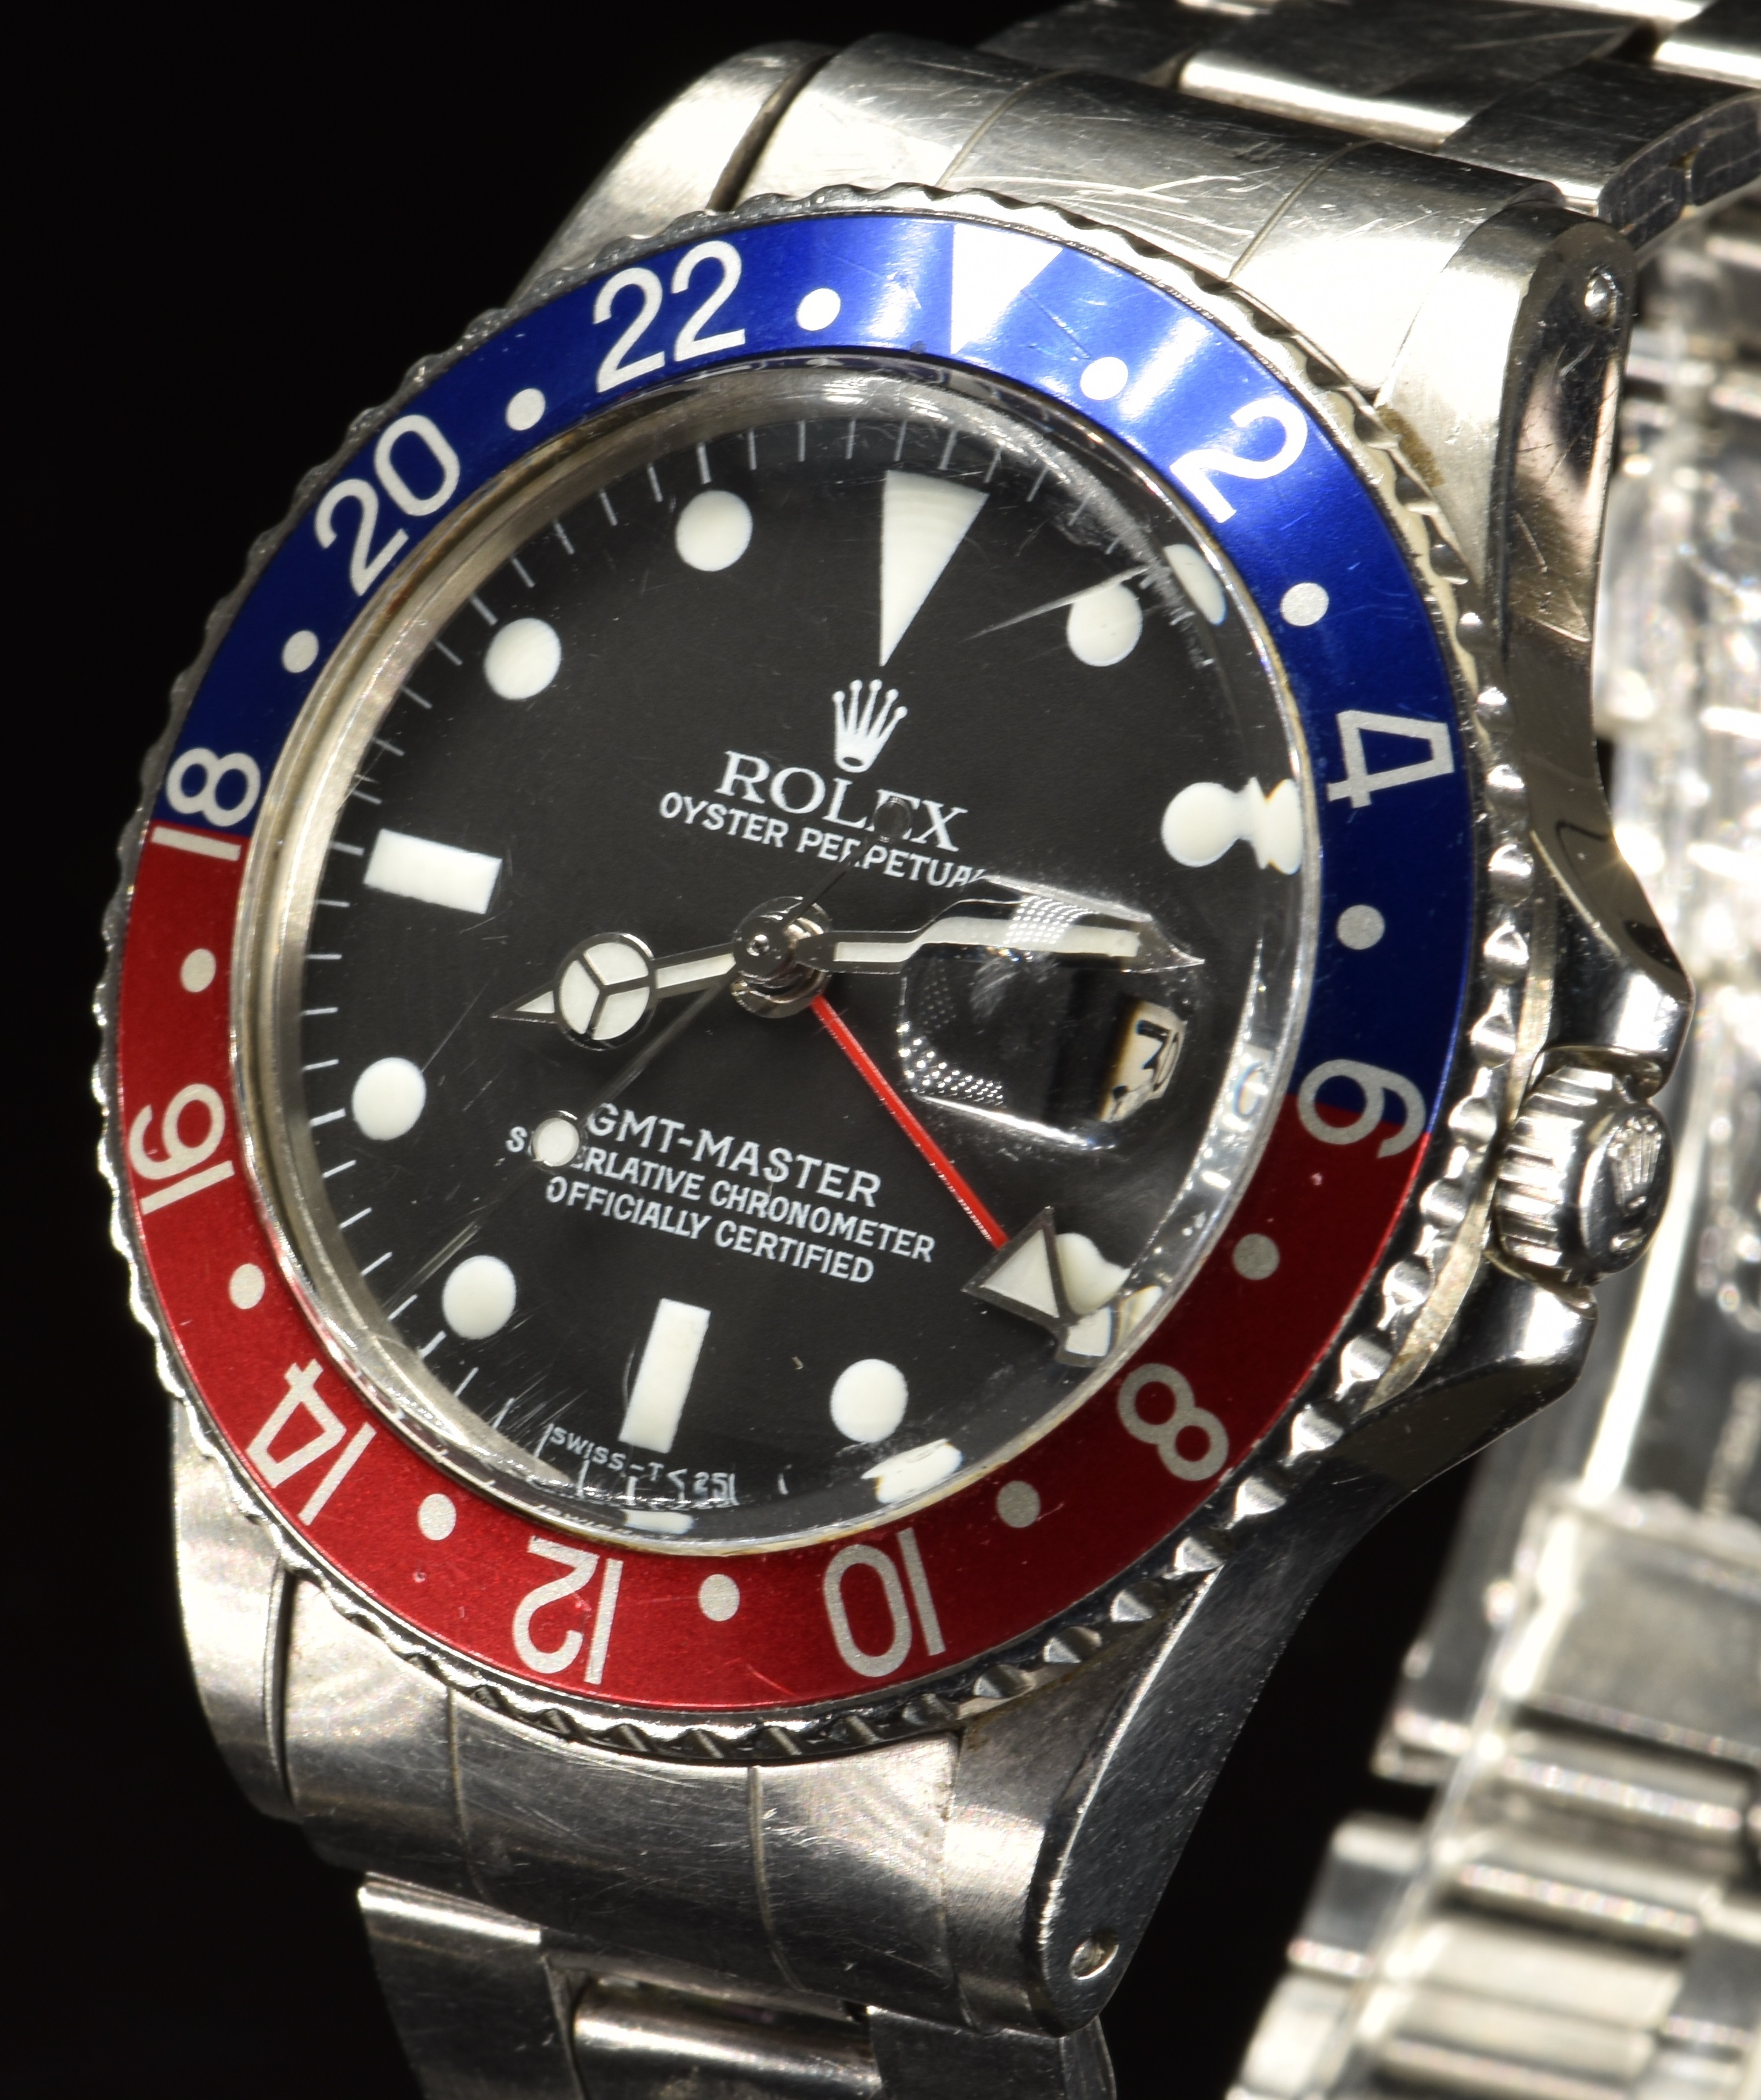 Rolex Oyster Perpetual GMT Master gentleman's automatic wristwatch ref. 1675 with date aperture, - Image 5 of 8